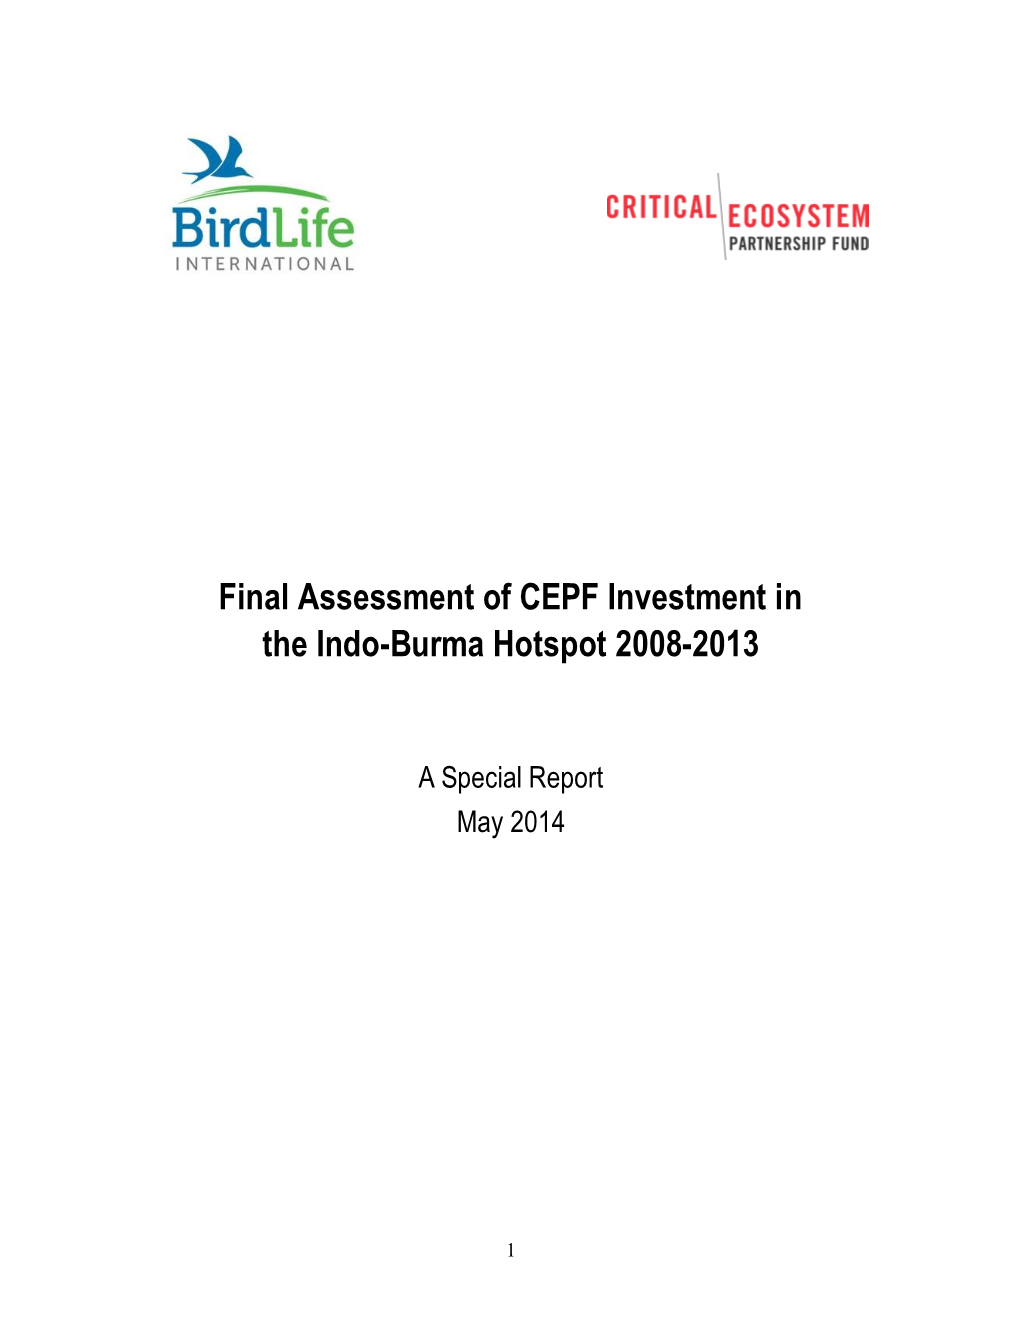 Final Assessment of CEPF Investment in the Indo-Burma Hotspot 2008-2013